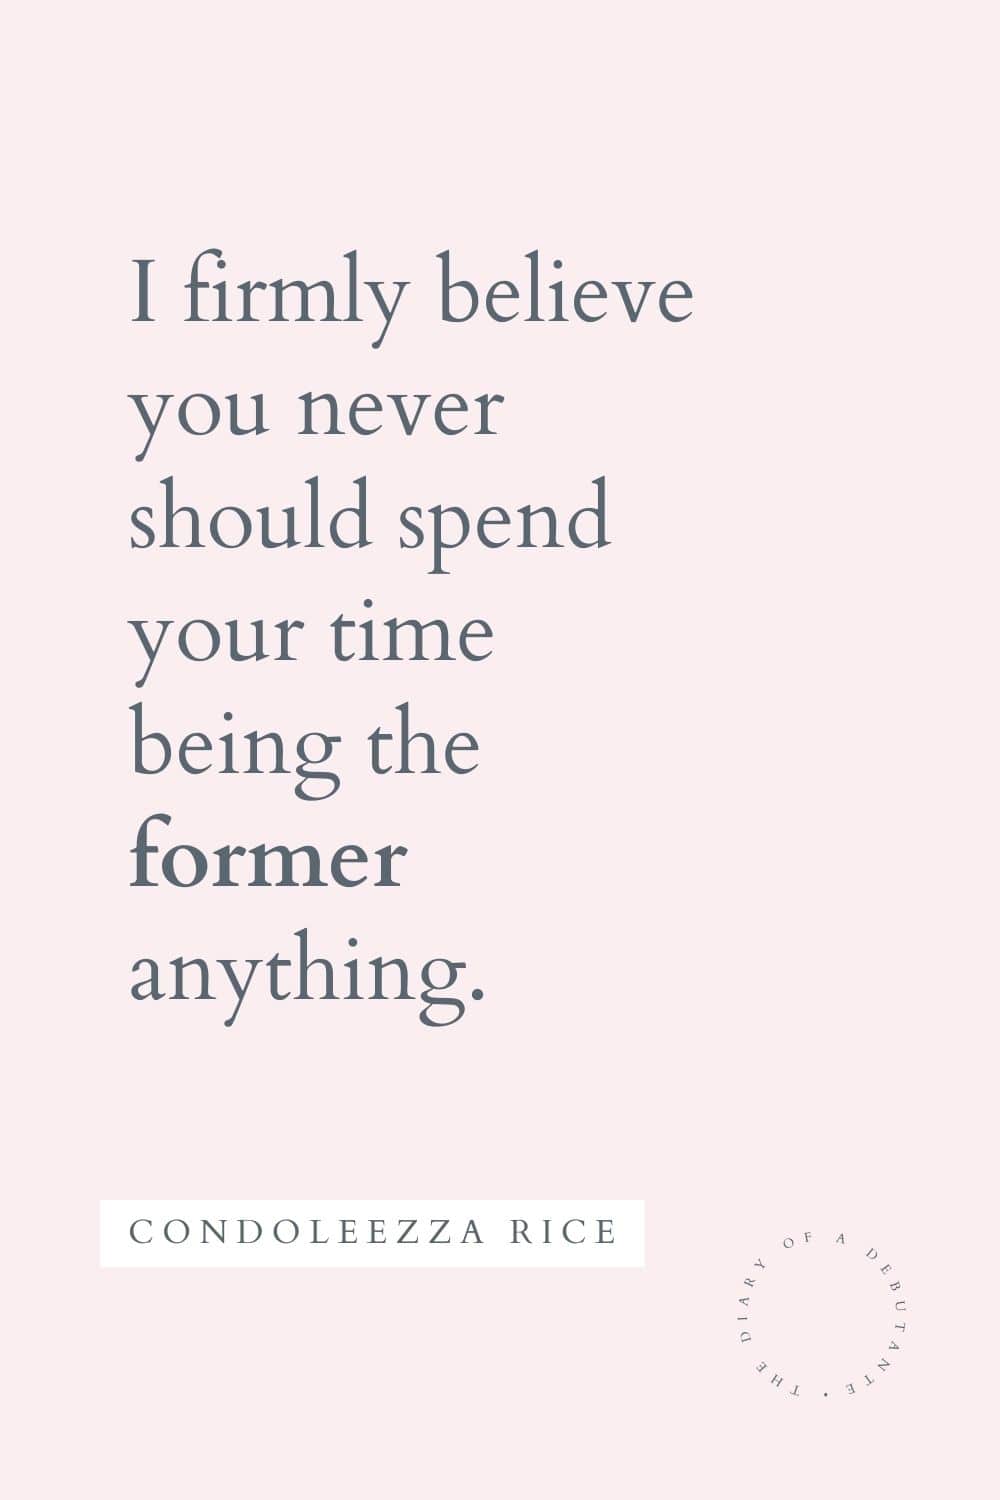 Condoleezza Rice quote curated as part of a collection of motivational quotes for working women by blogger Stephanie Ziajka on Diary of a Debutante